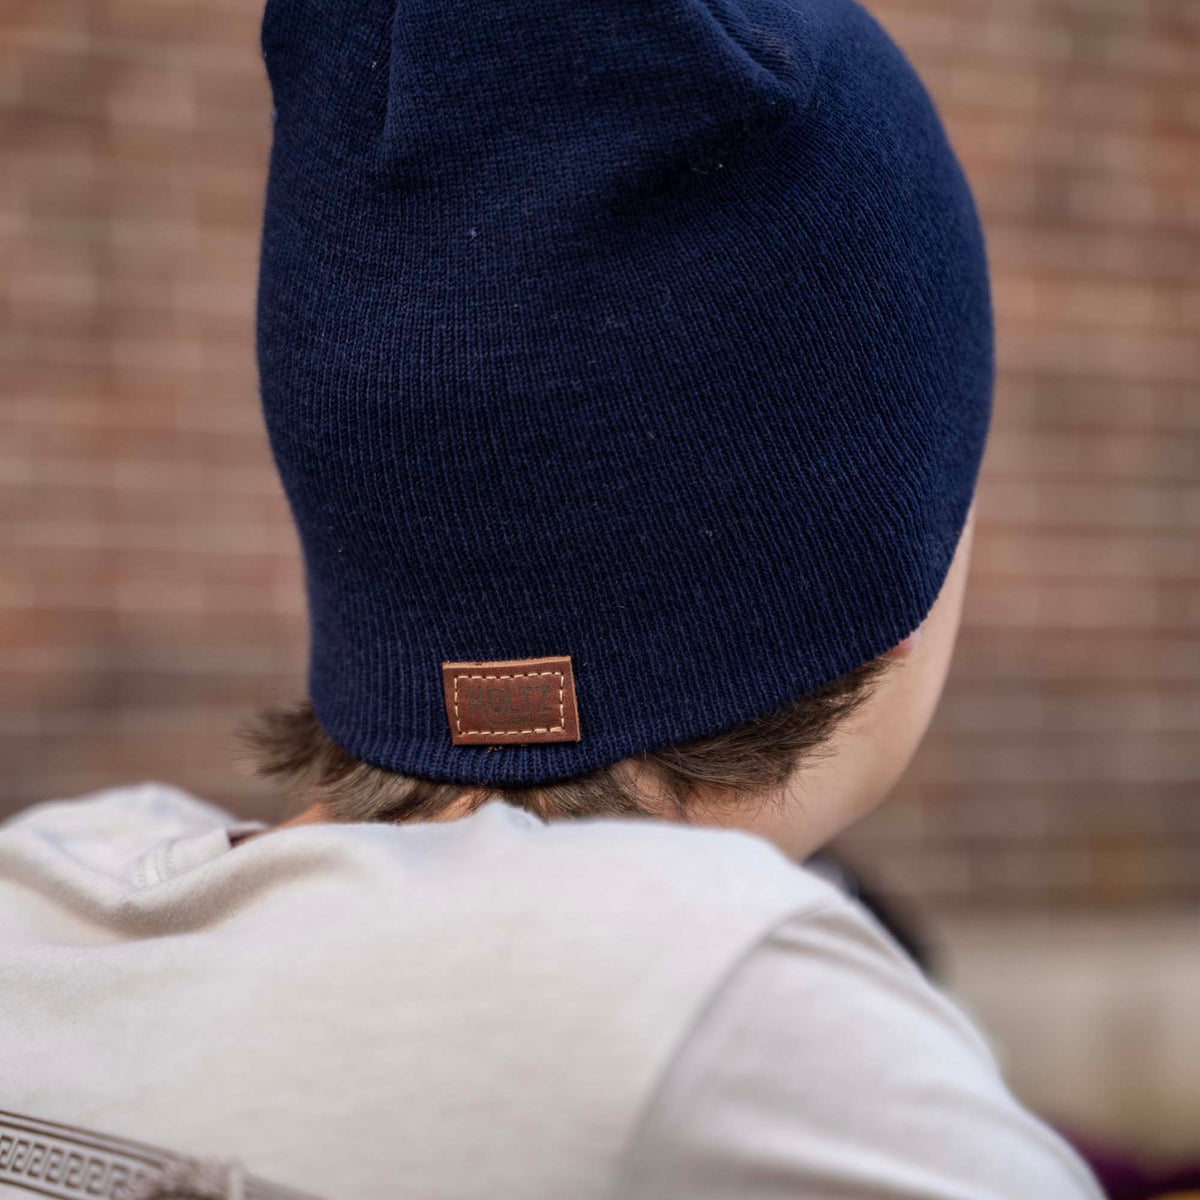 Solid Knit Custom Leather Patch Richardson Beanie